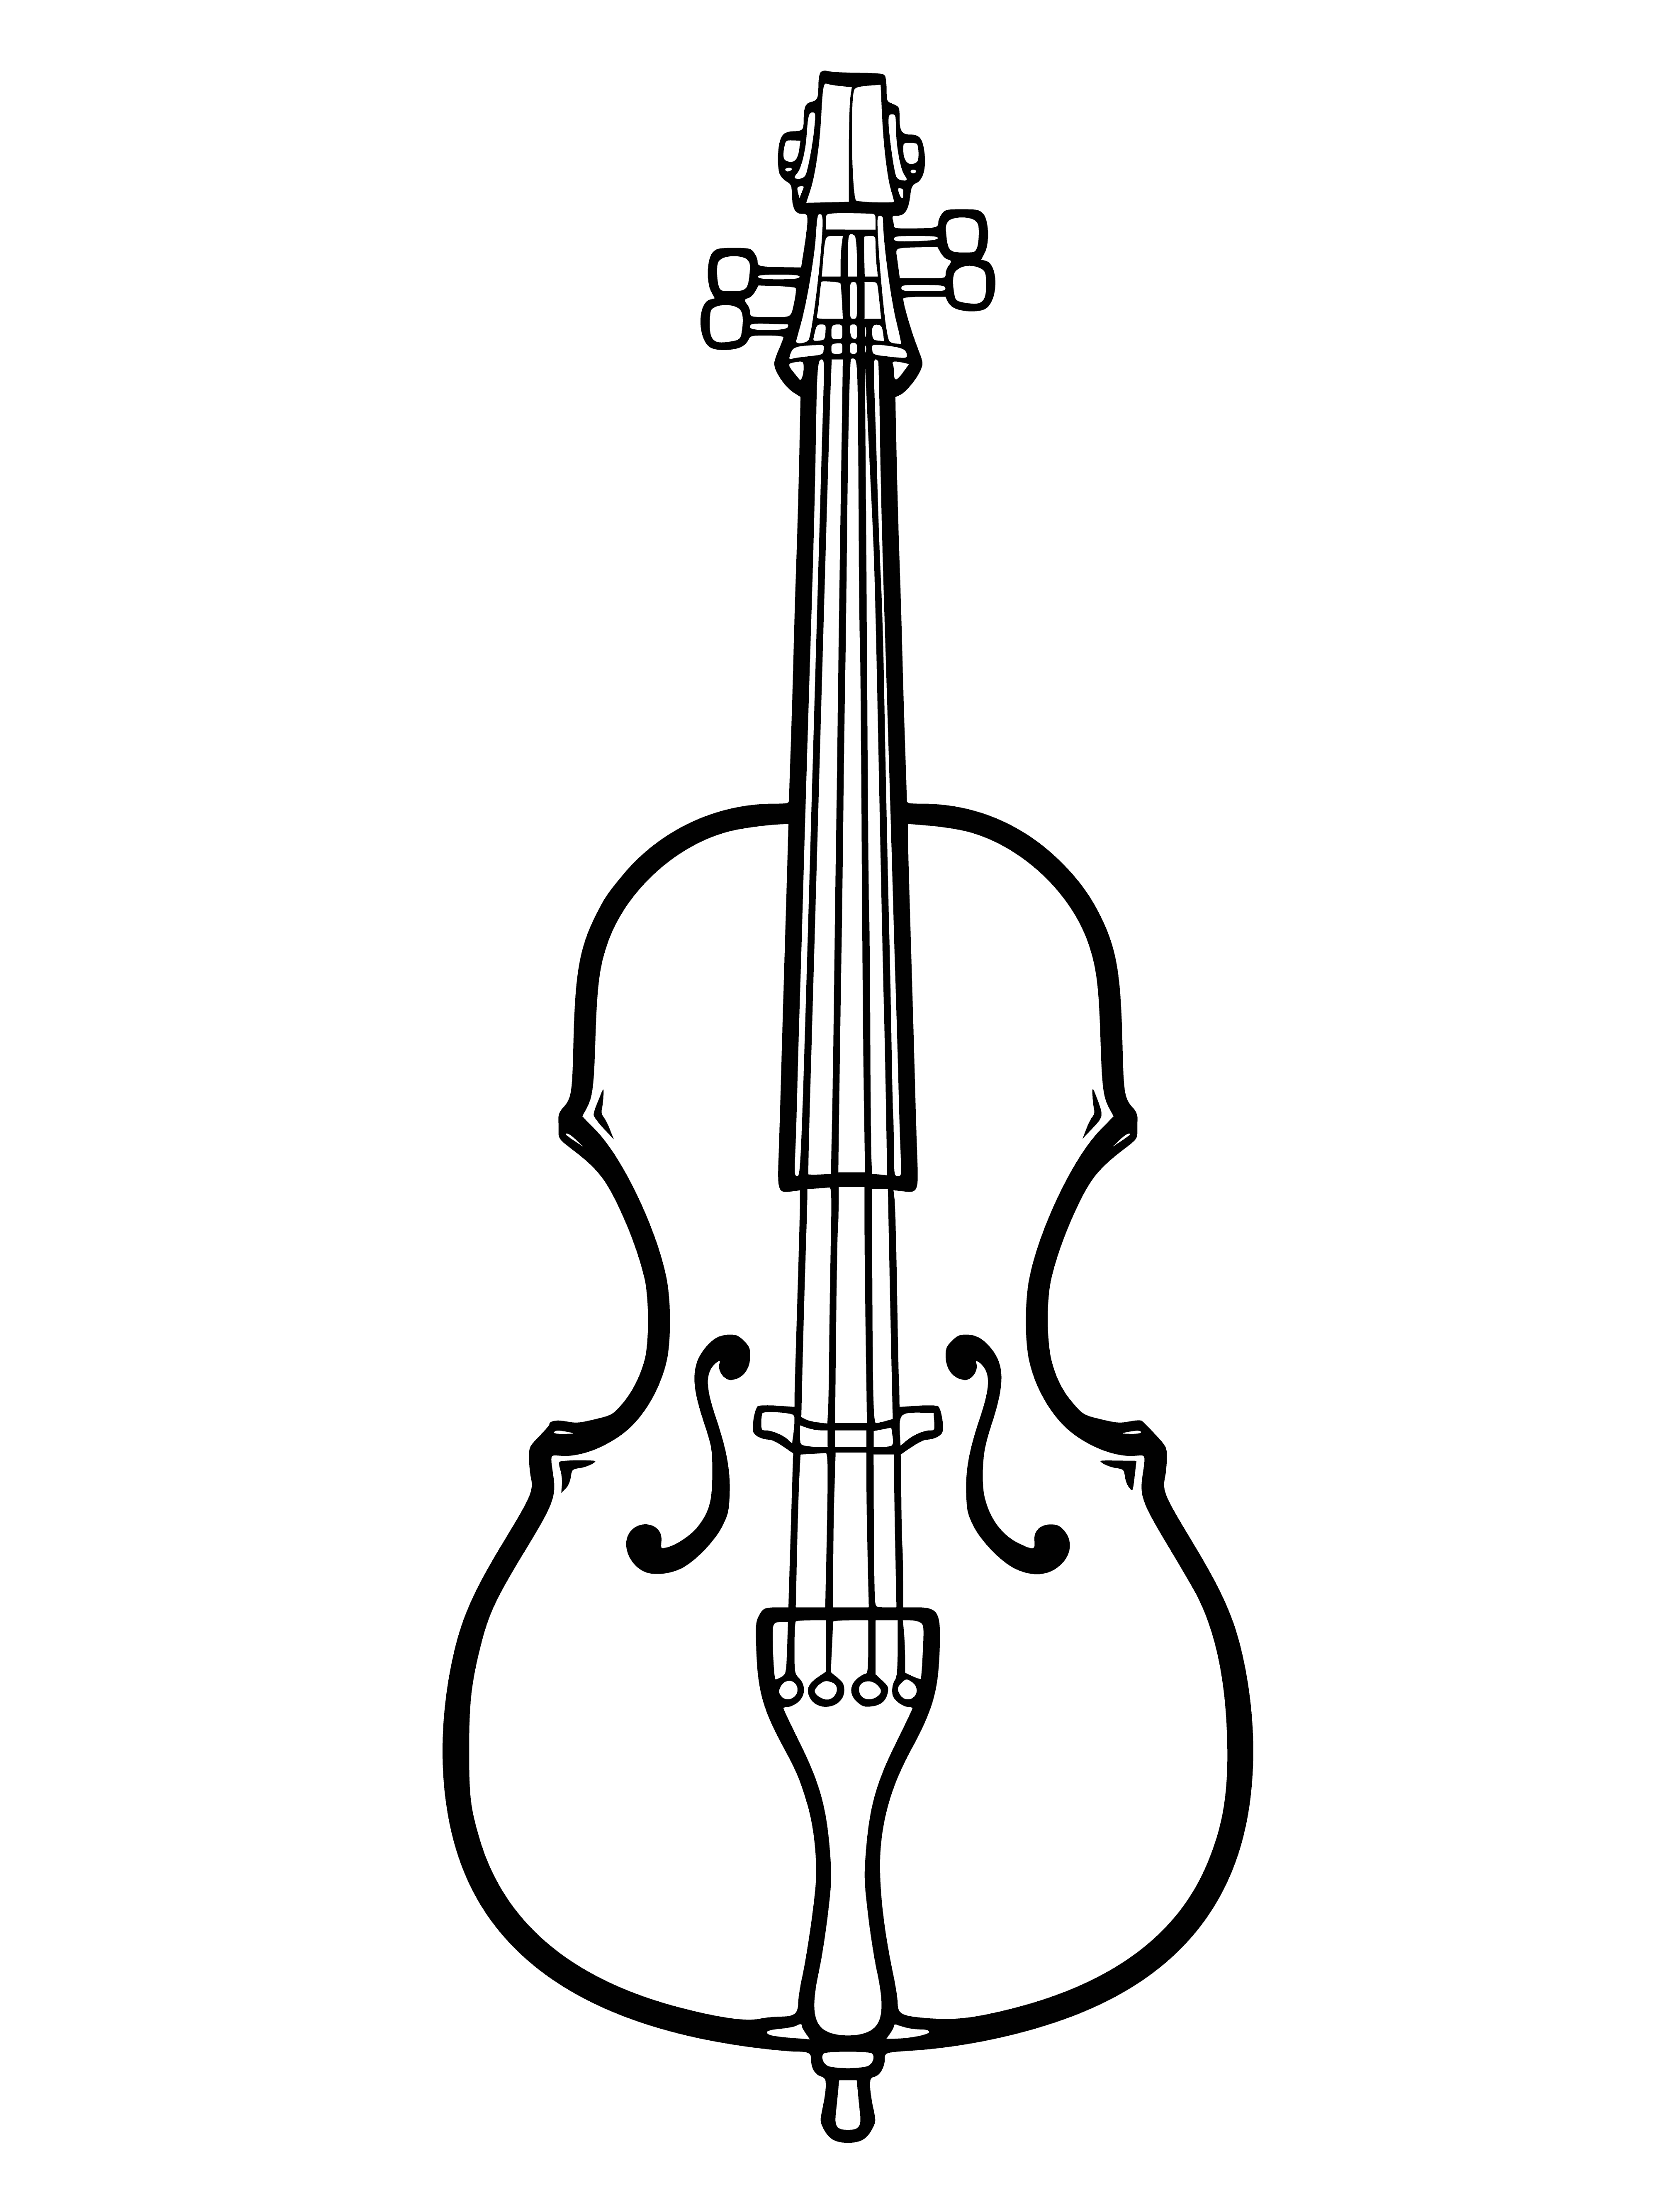 coloring page: The cello is a large, versatile instrument held between the legs and played with a bow, with four strings tuned to different notes.